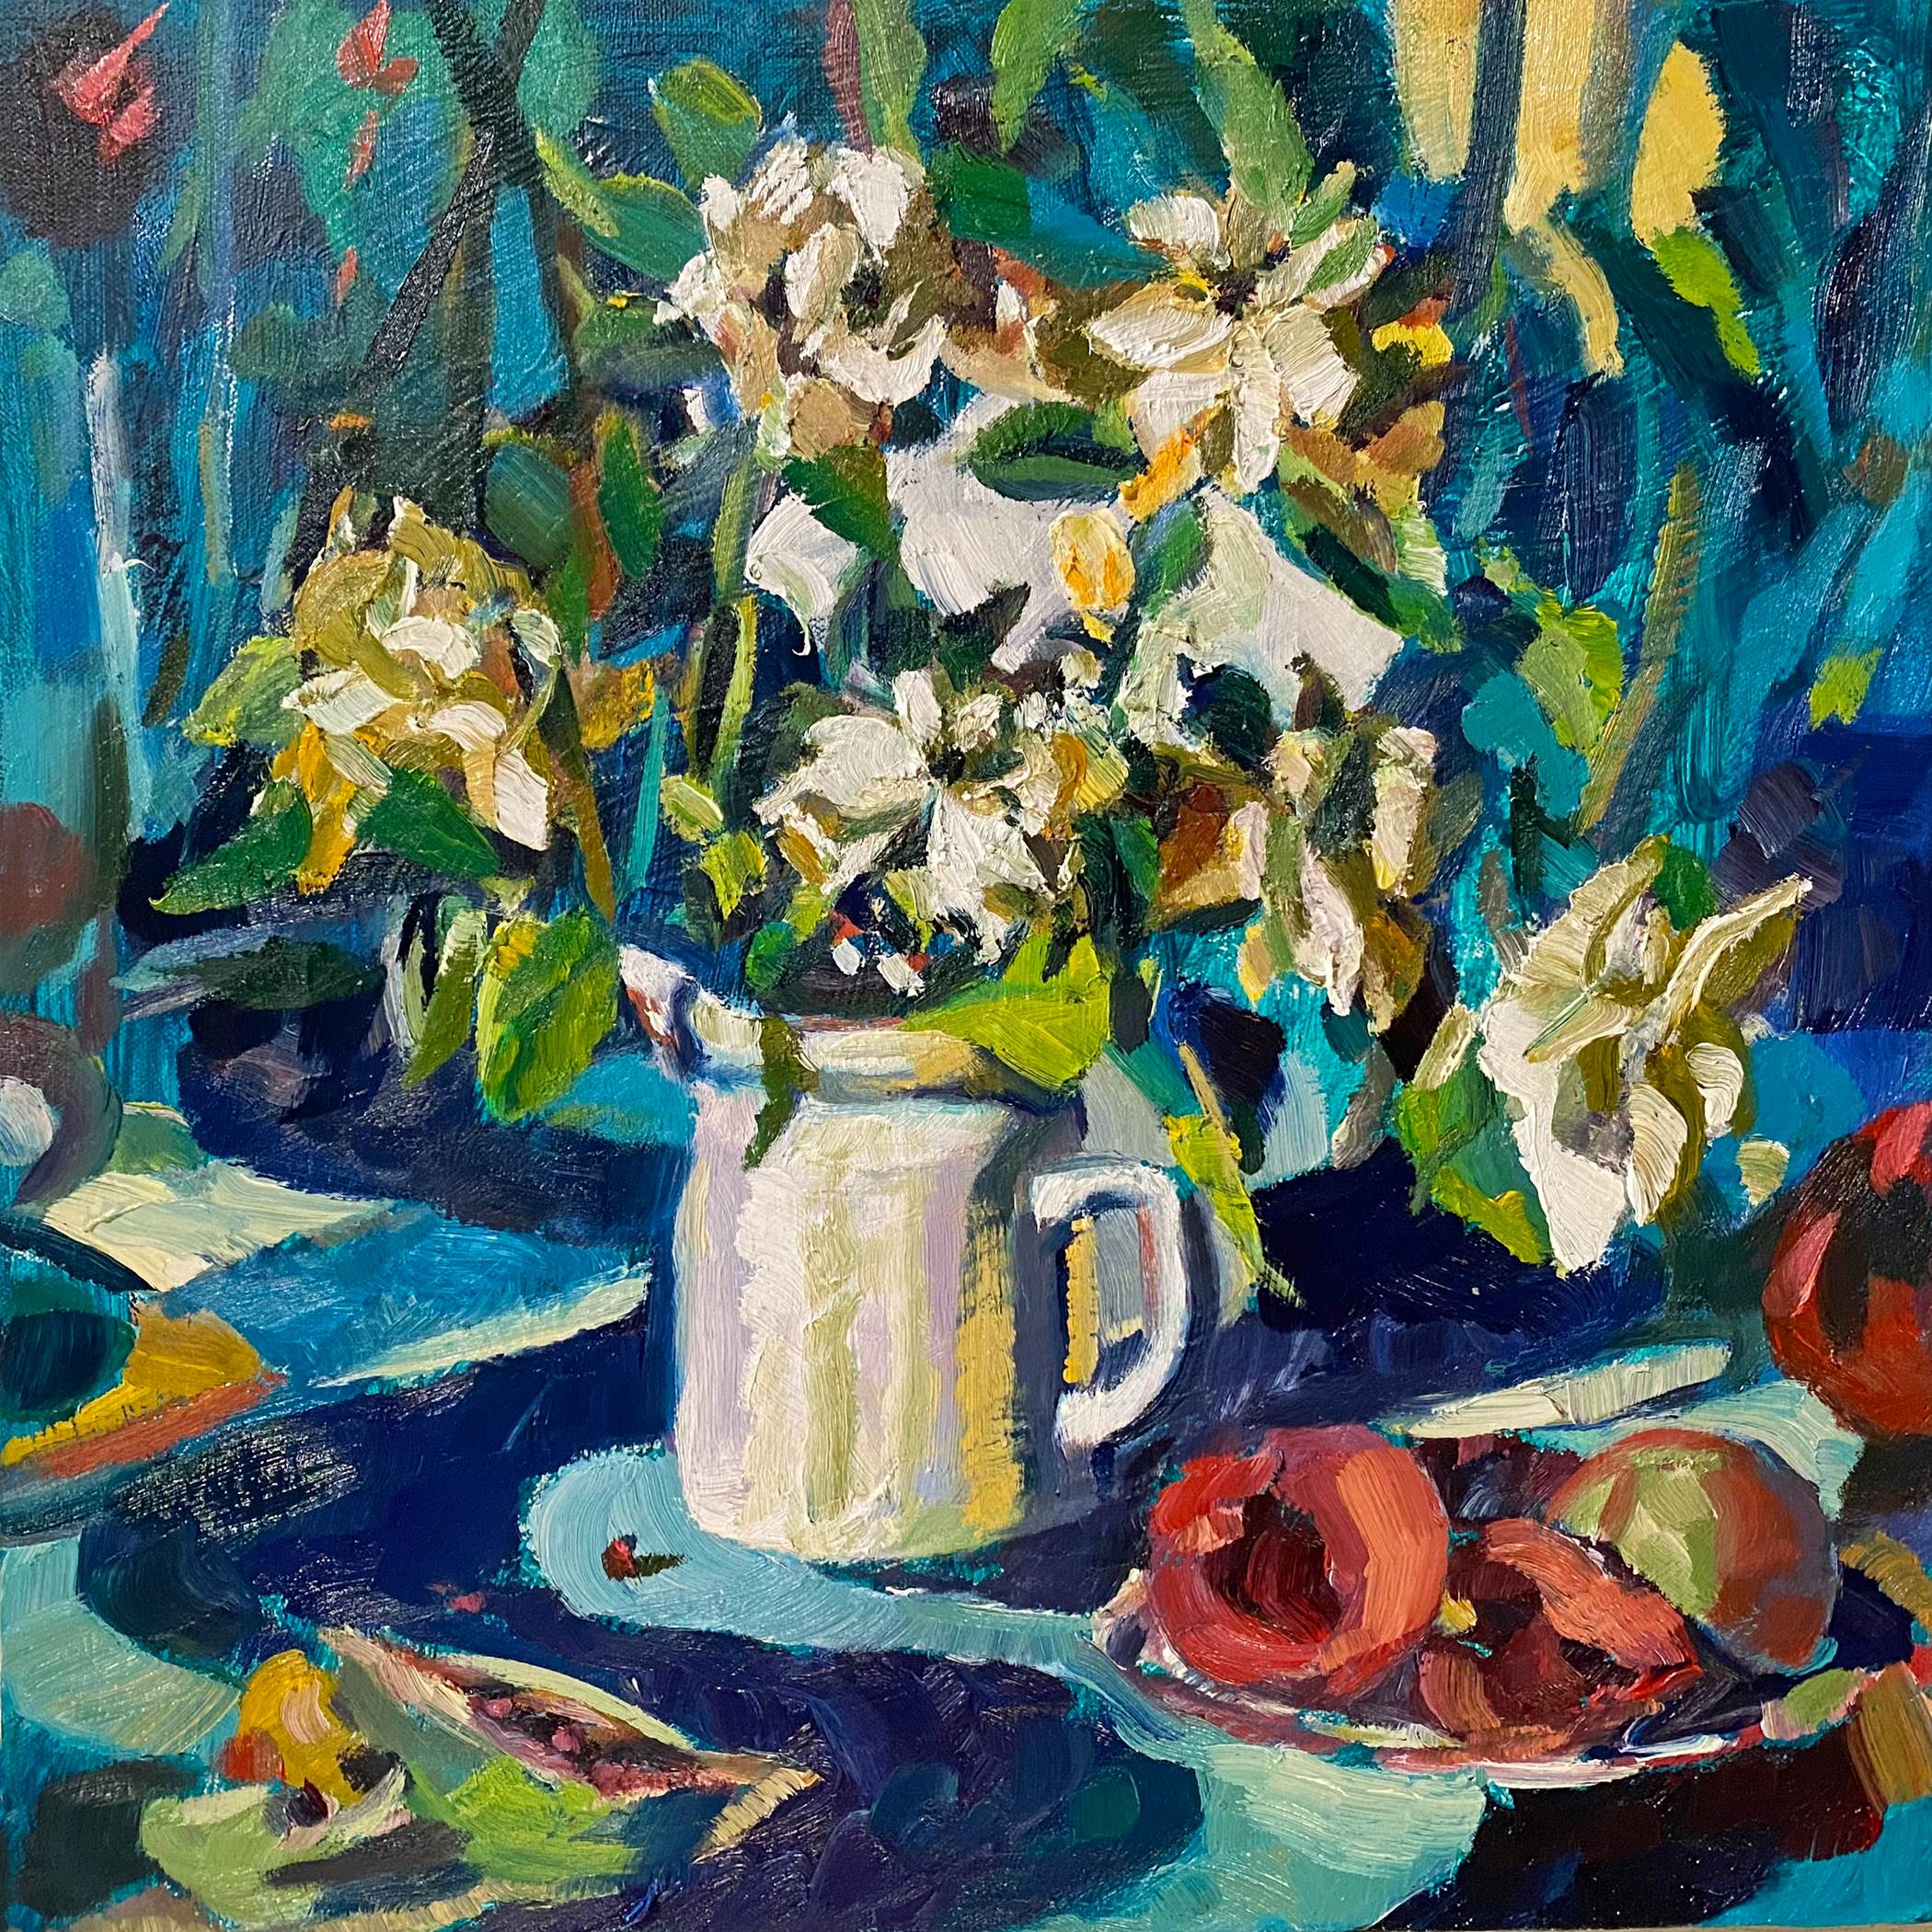 Rosemary Valadon 'In the Blue' oil on canvas 40 x 40cm $4,800